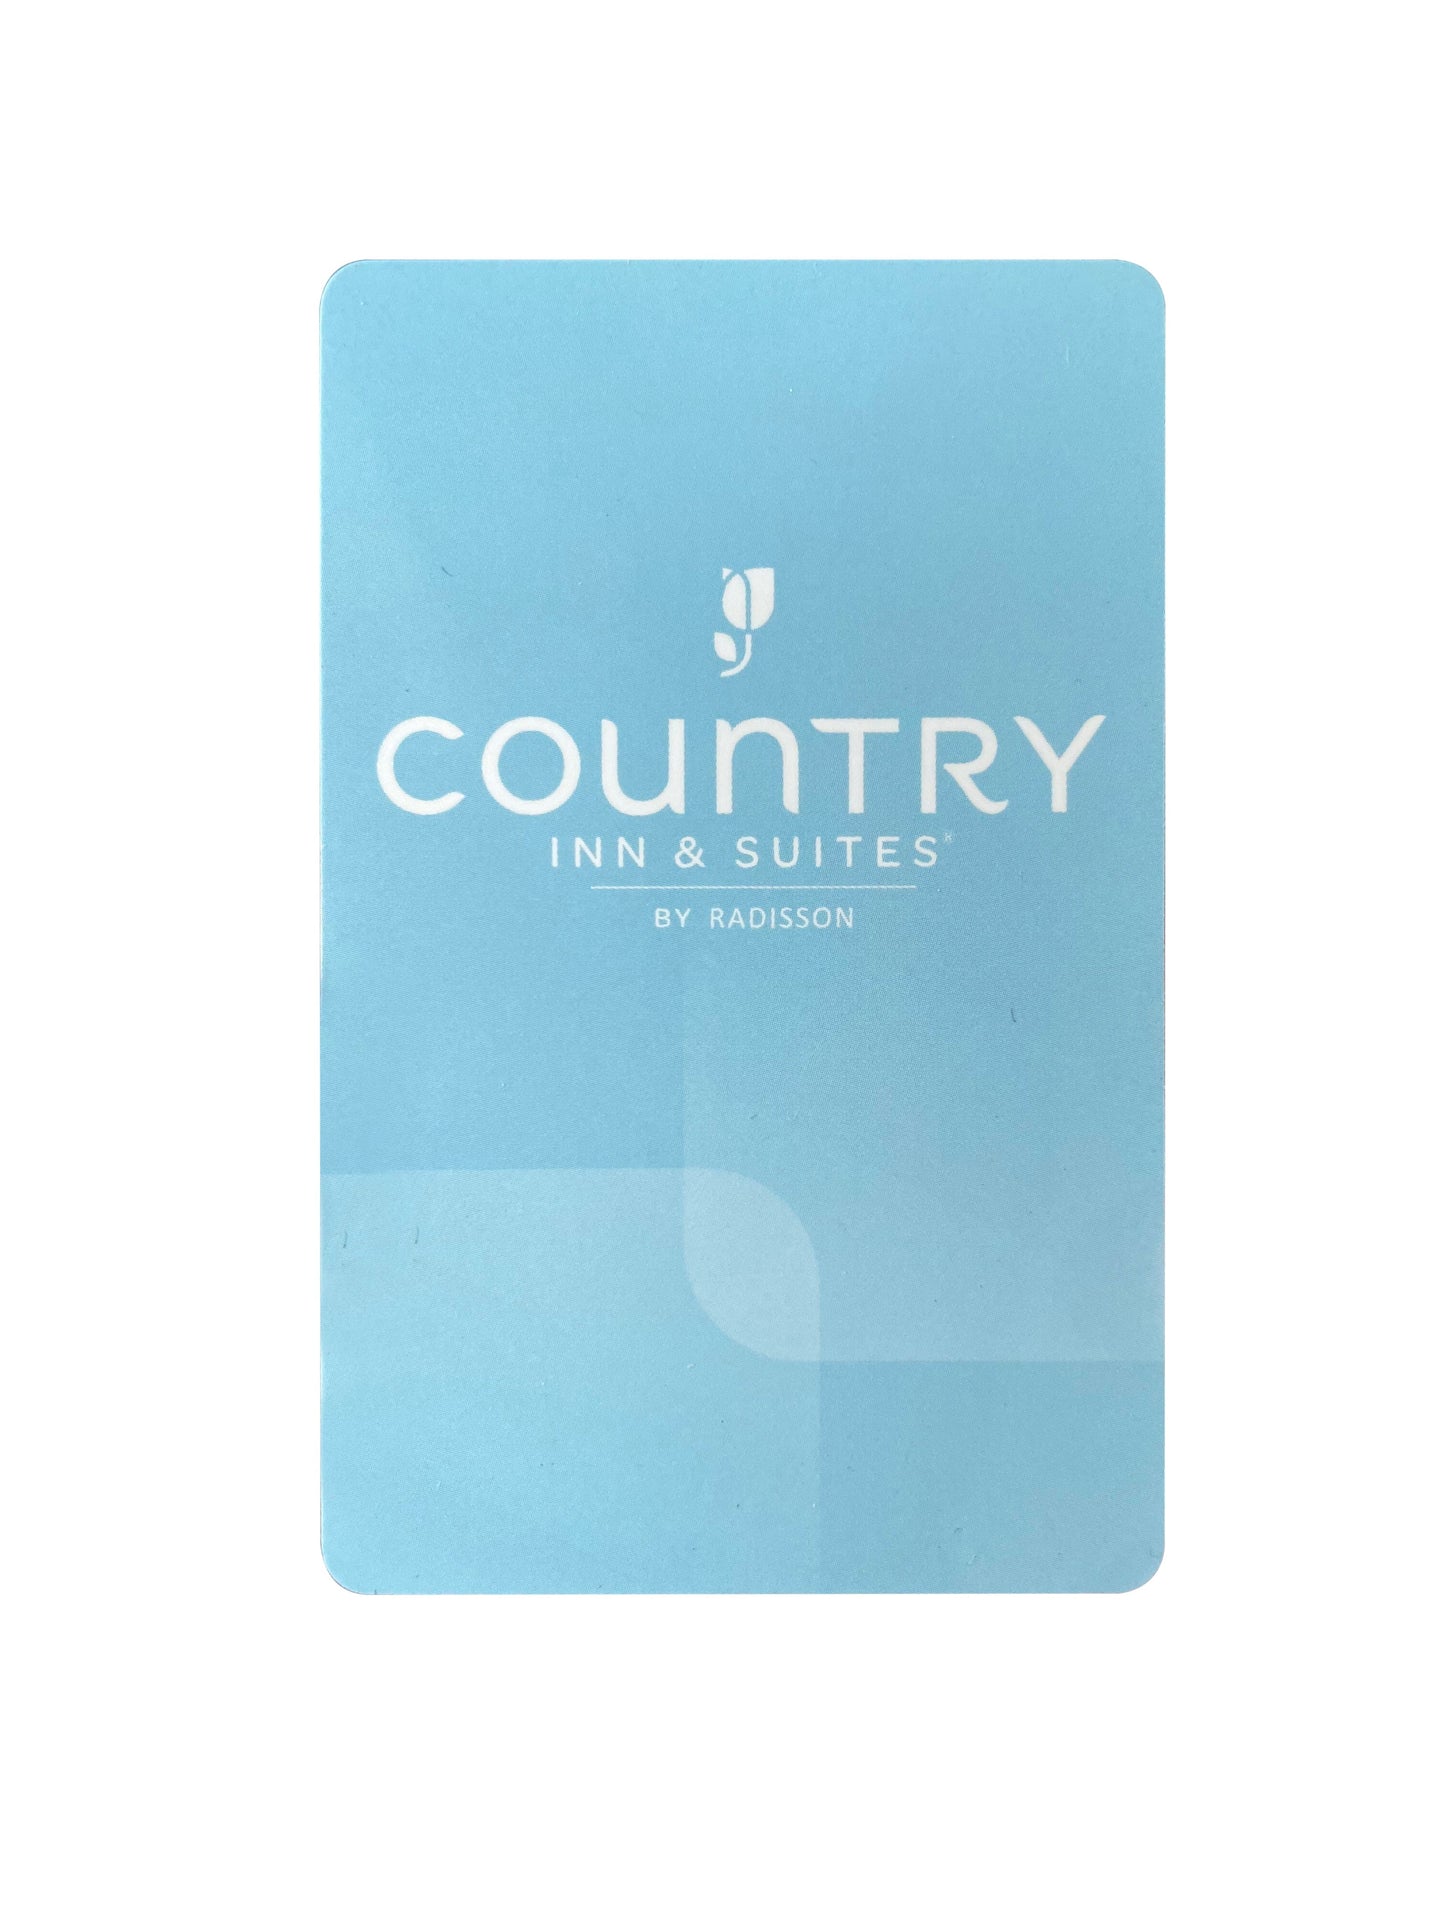 Country Inn and Suite RFID Key Cards (Sold in boxes of 200)